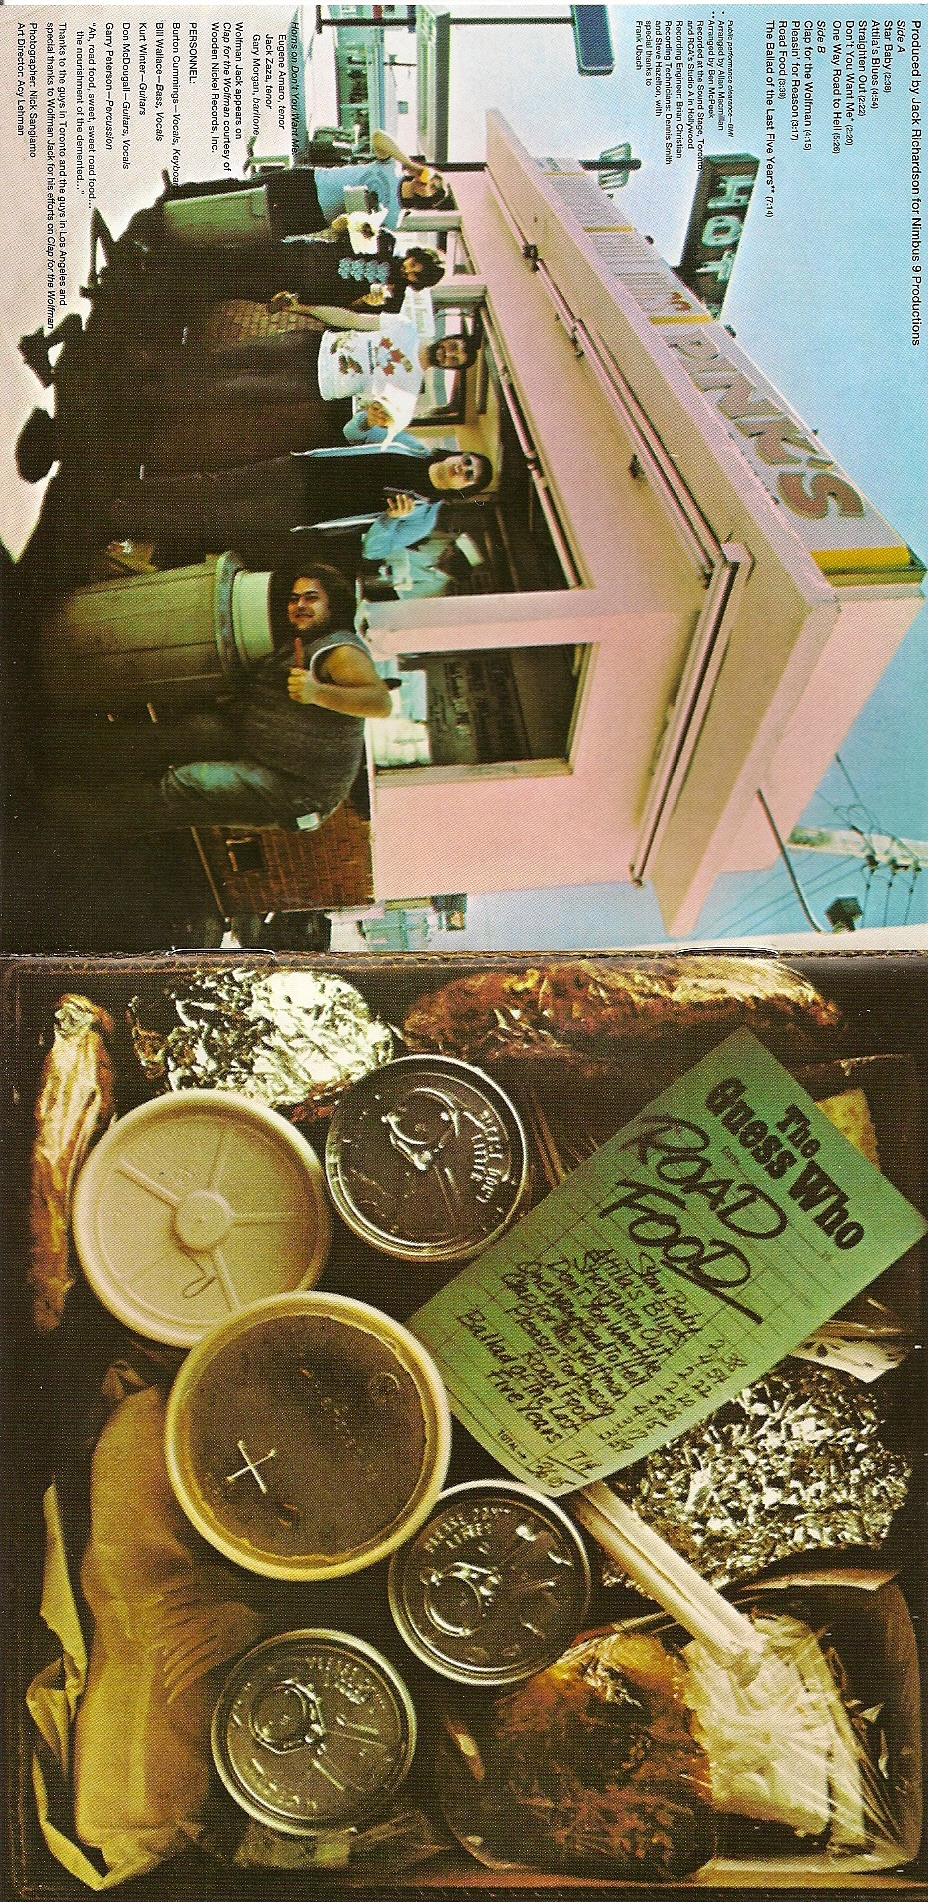 The Guess Who Road Food 1974 2012